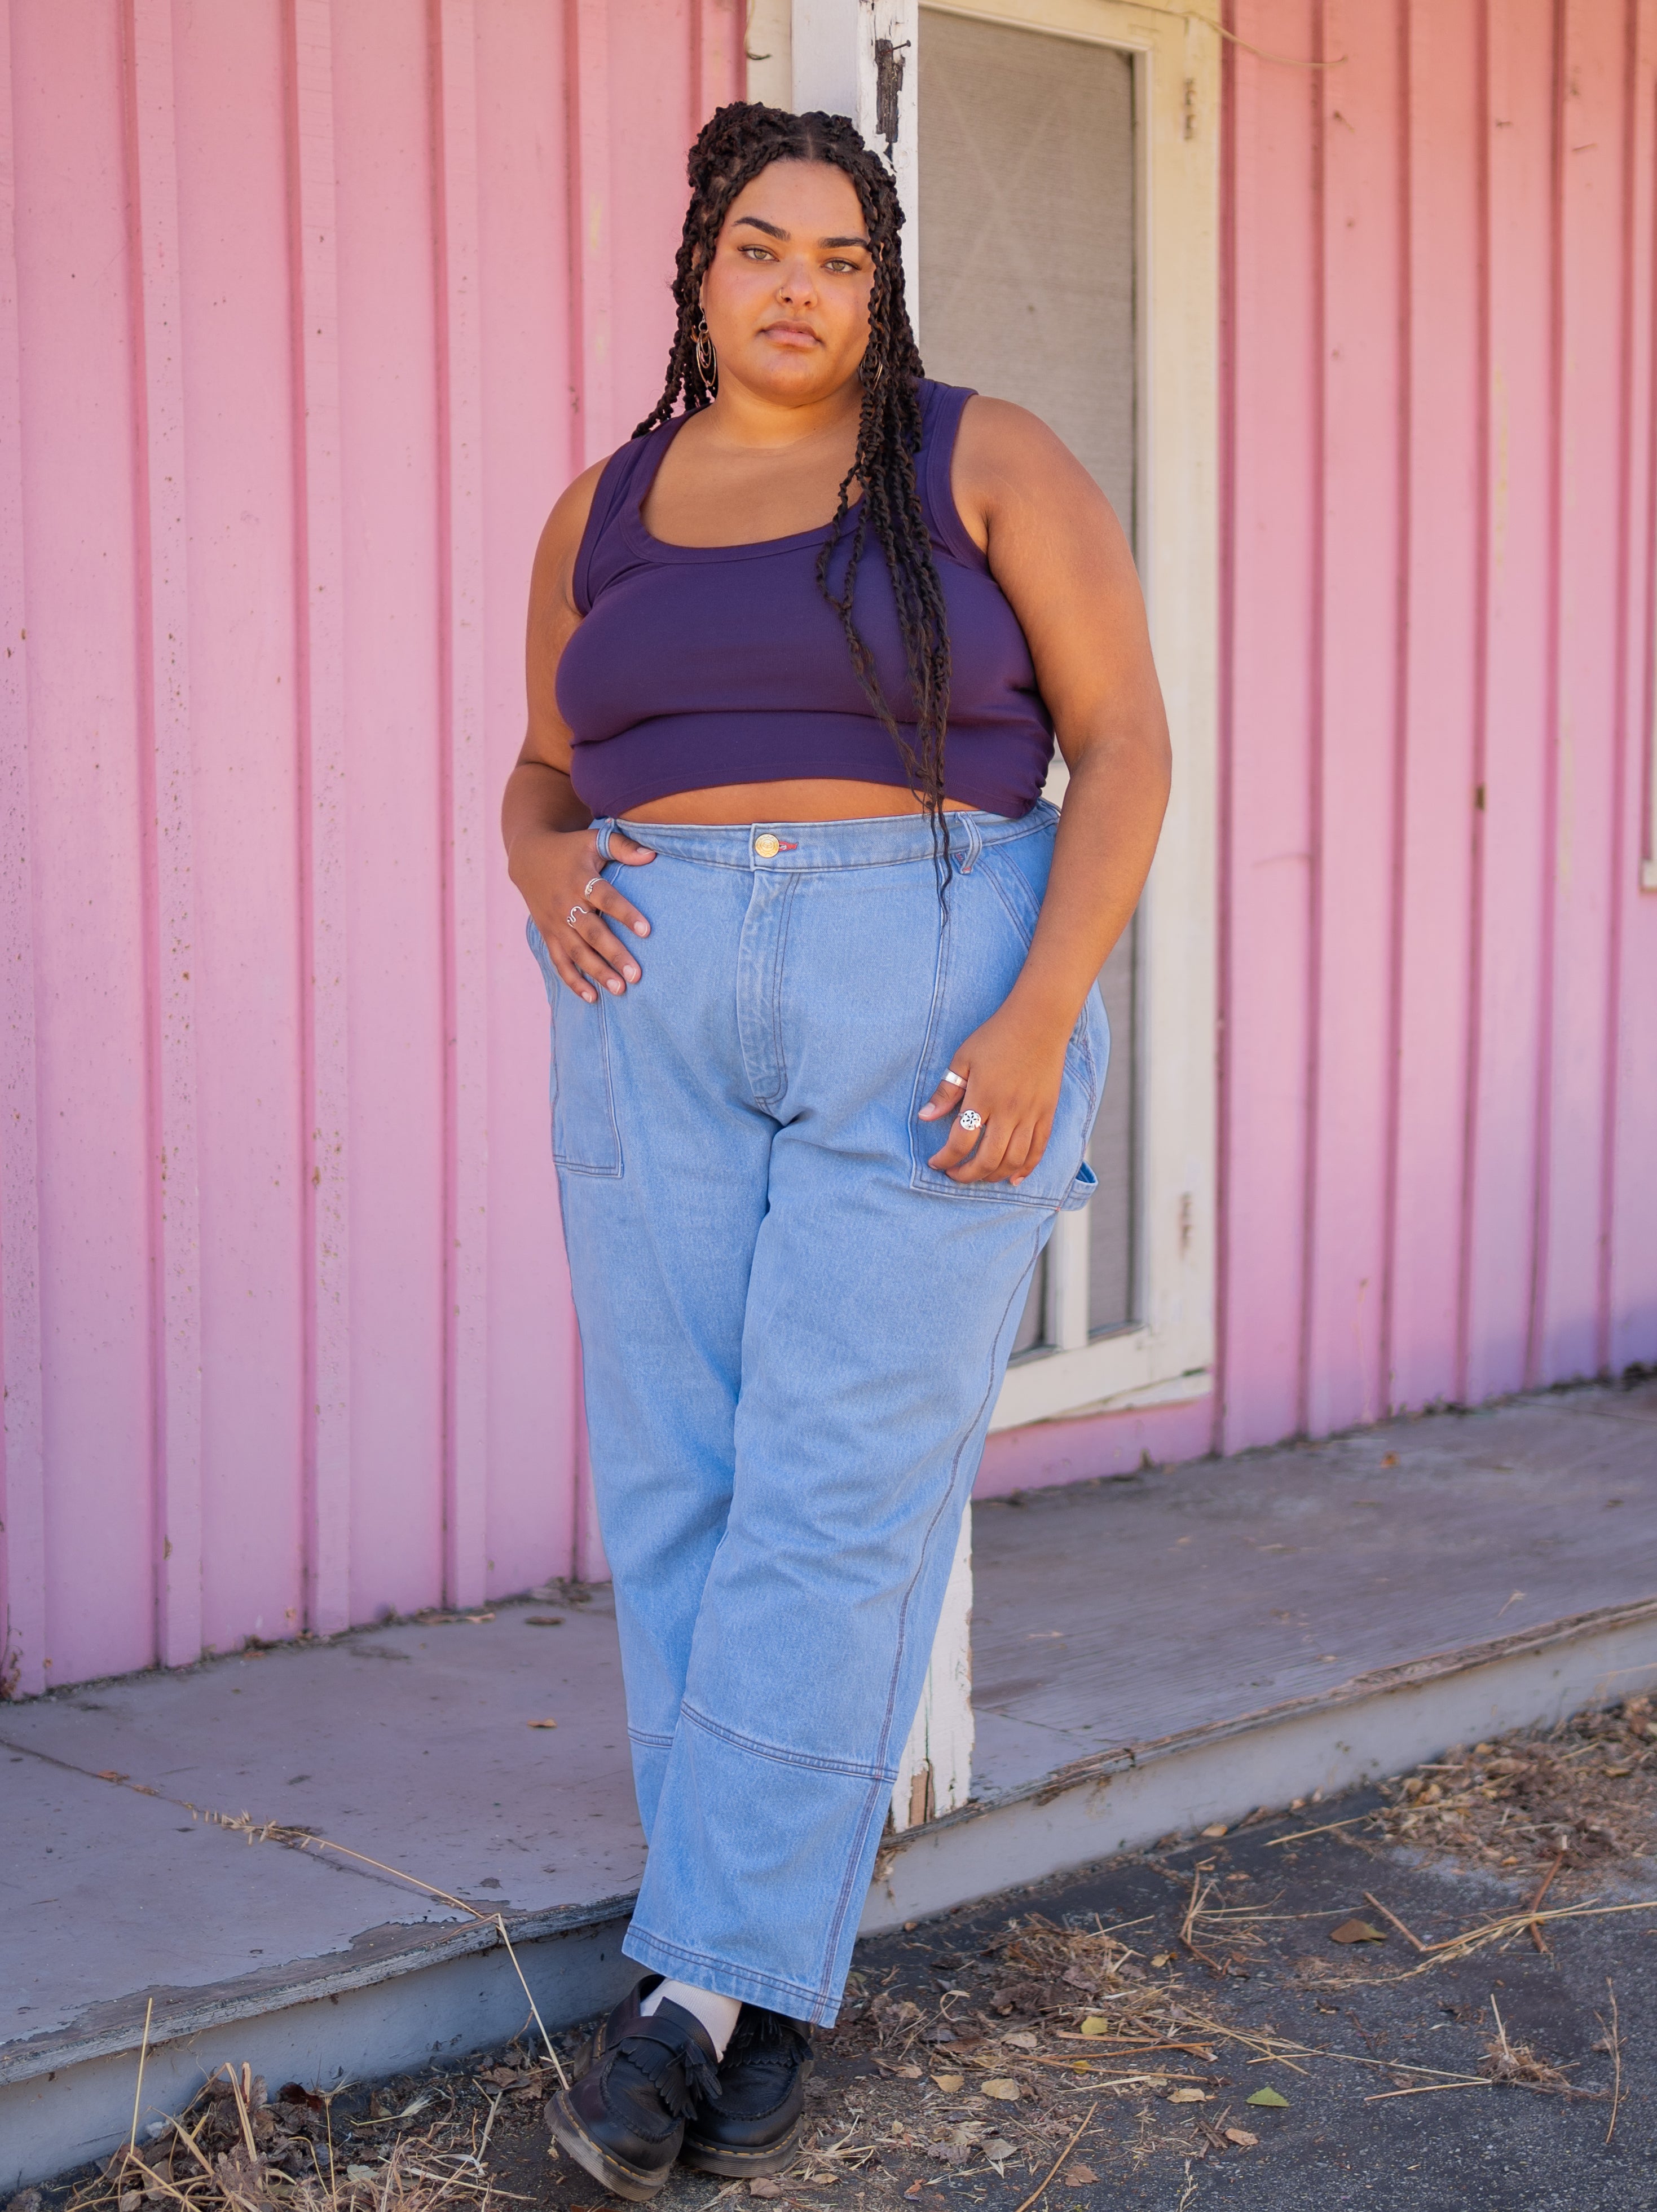 Alicia is wearing Cropped Tank Top in Nebula and Carpenter Jeans in Light Wash